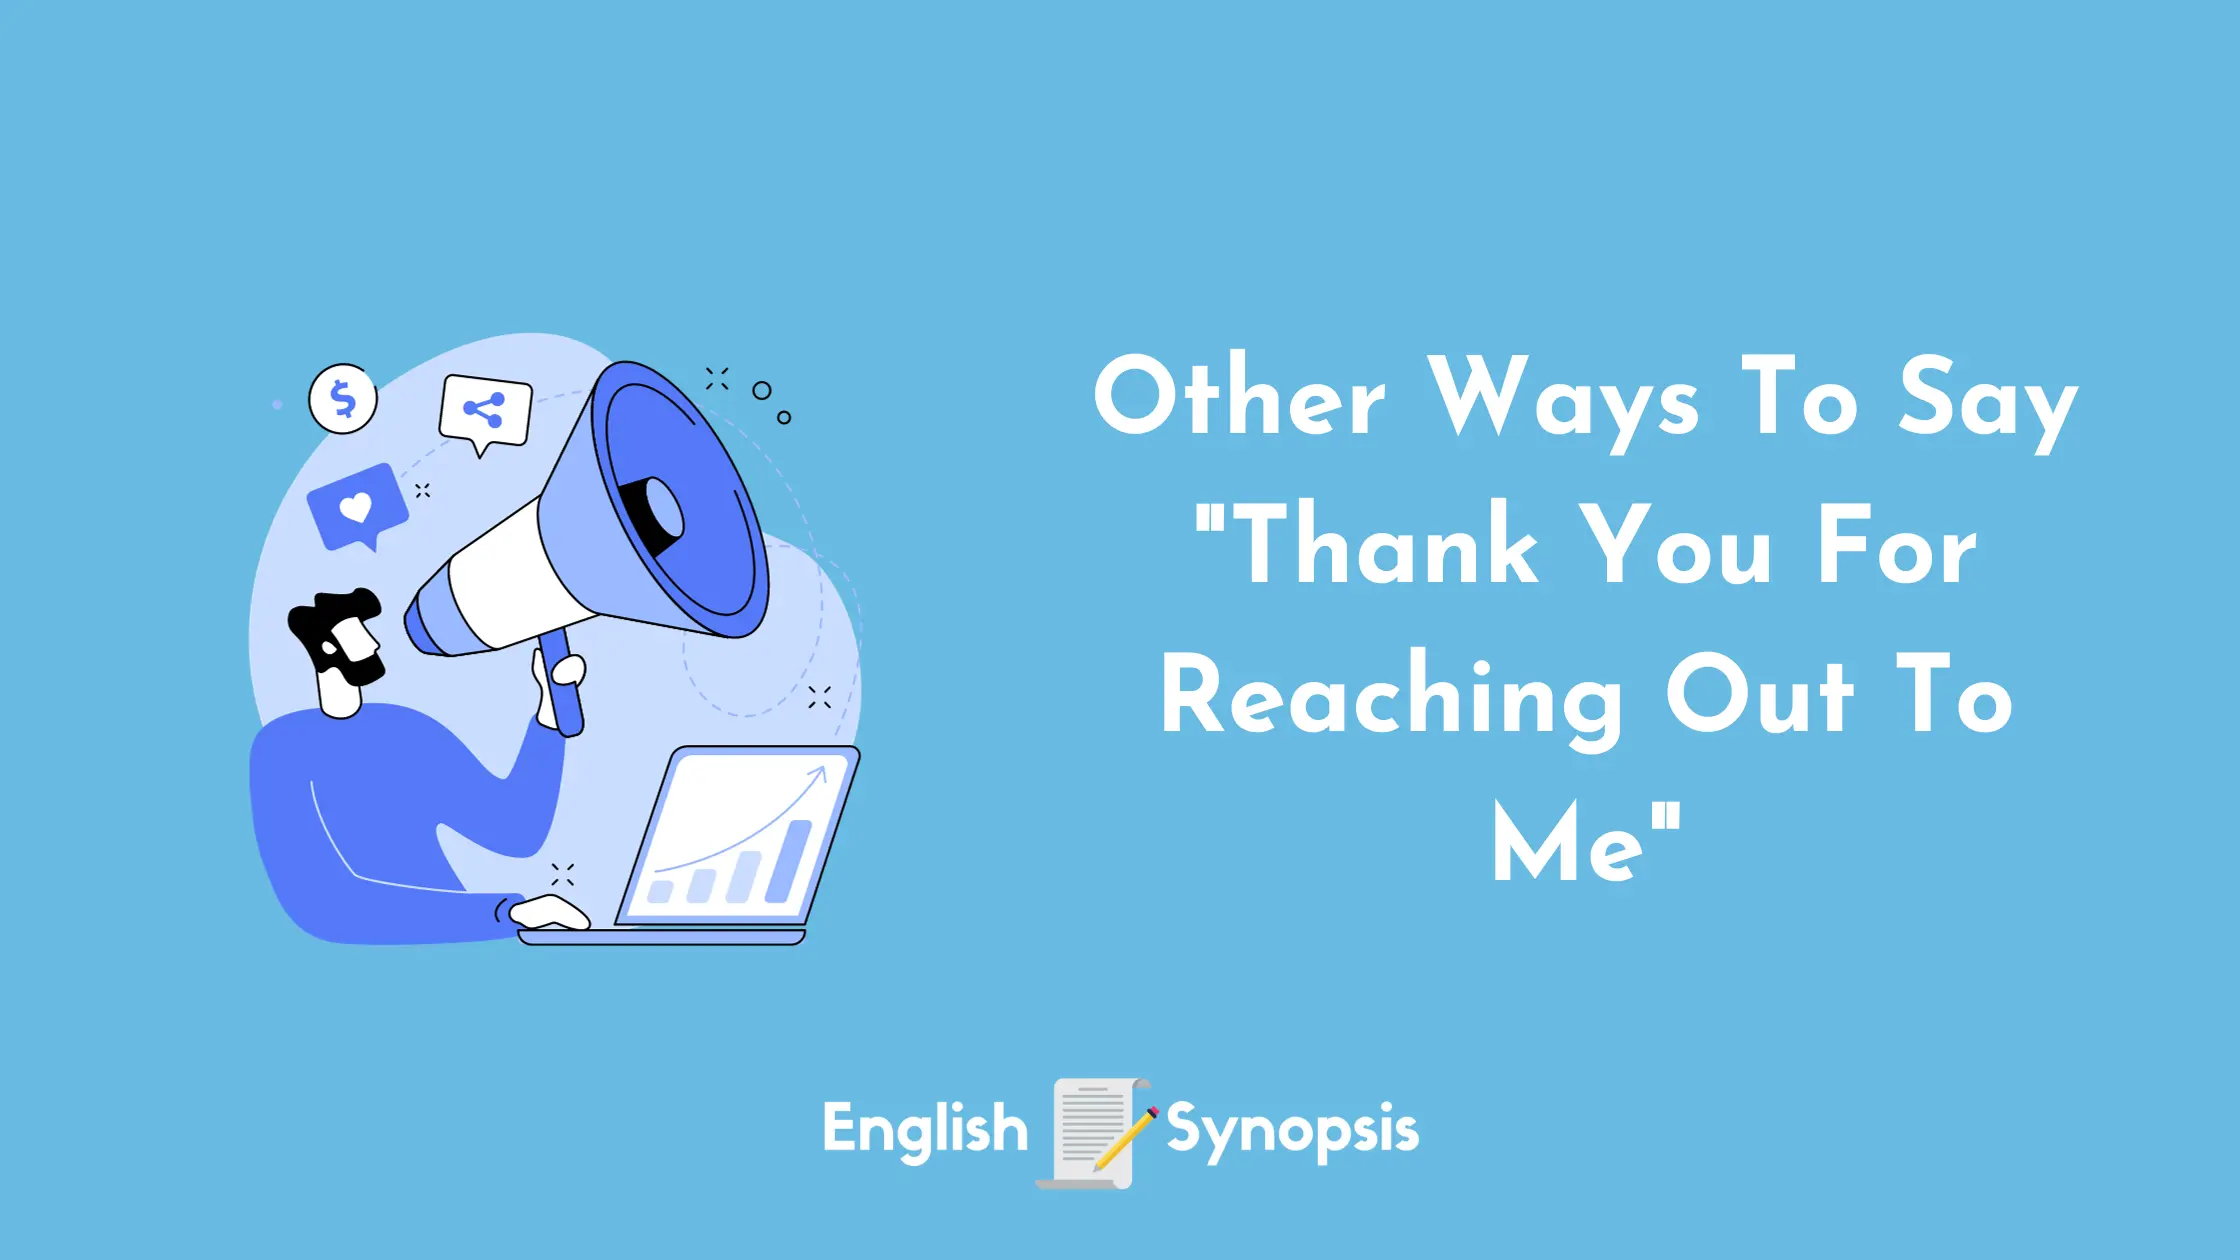 Other Ways To Say "Thank You For Reaching Out To Me"